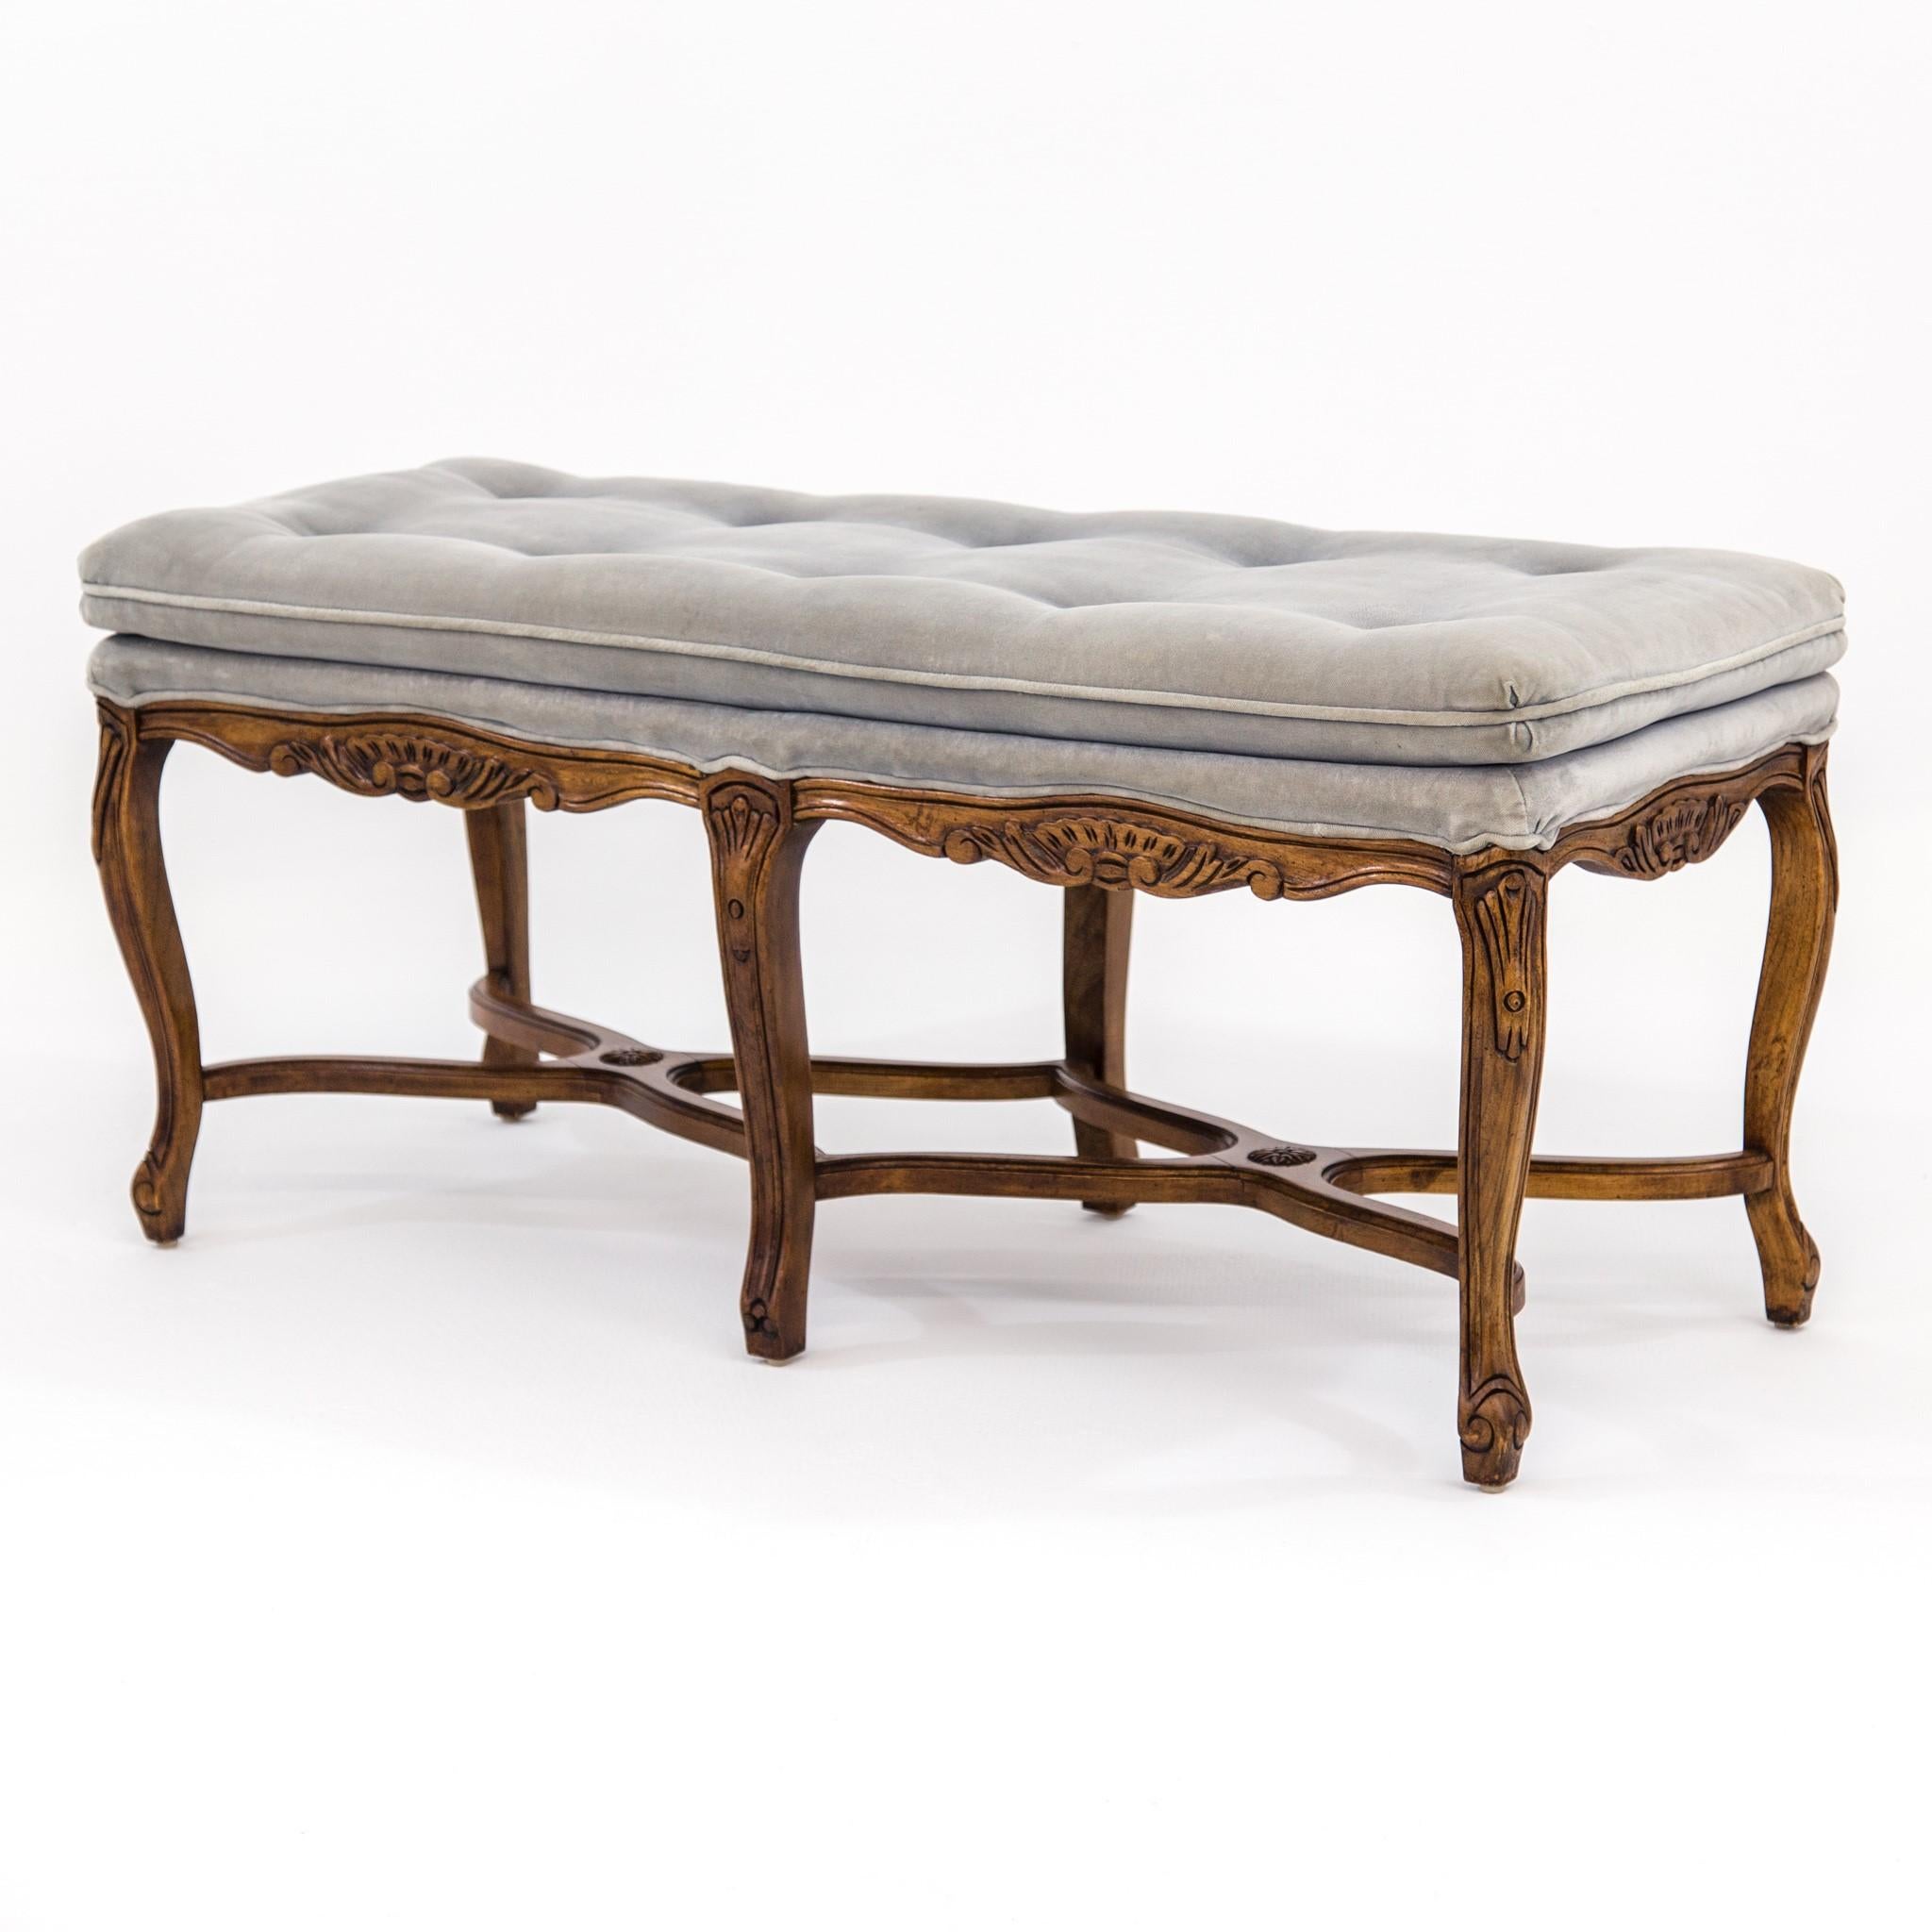 1960s Louis XV-style carved walnut bench or window seat with button tufted upholstery, cabriole legs and curved X stretchers by Bernhardt Flair Division. The original velvet fabric is light gray with teal undertone. The carved walnut frame has an